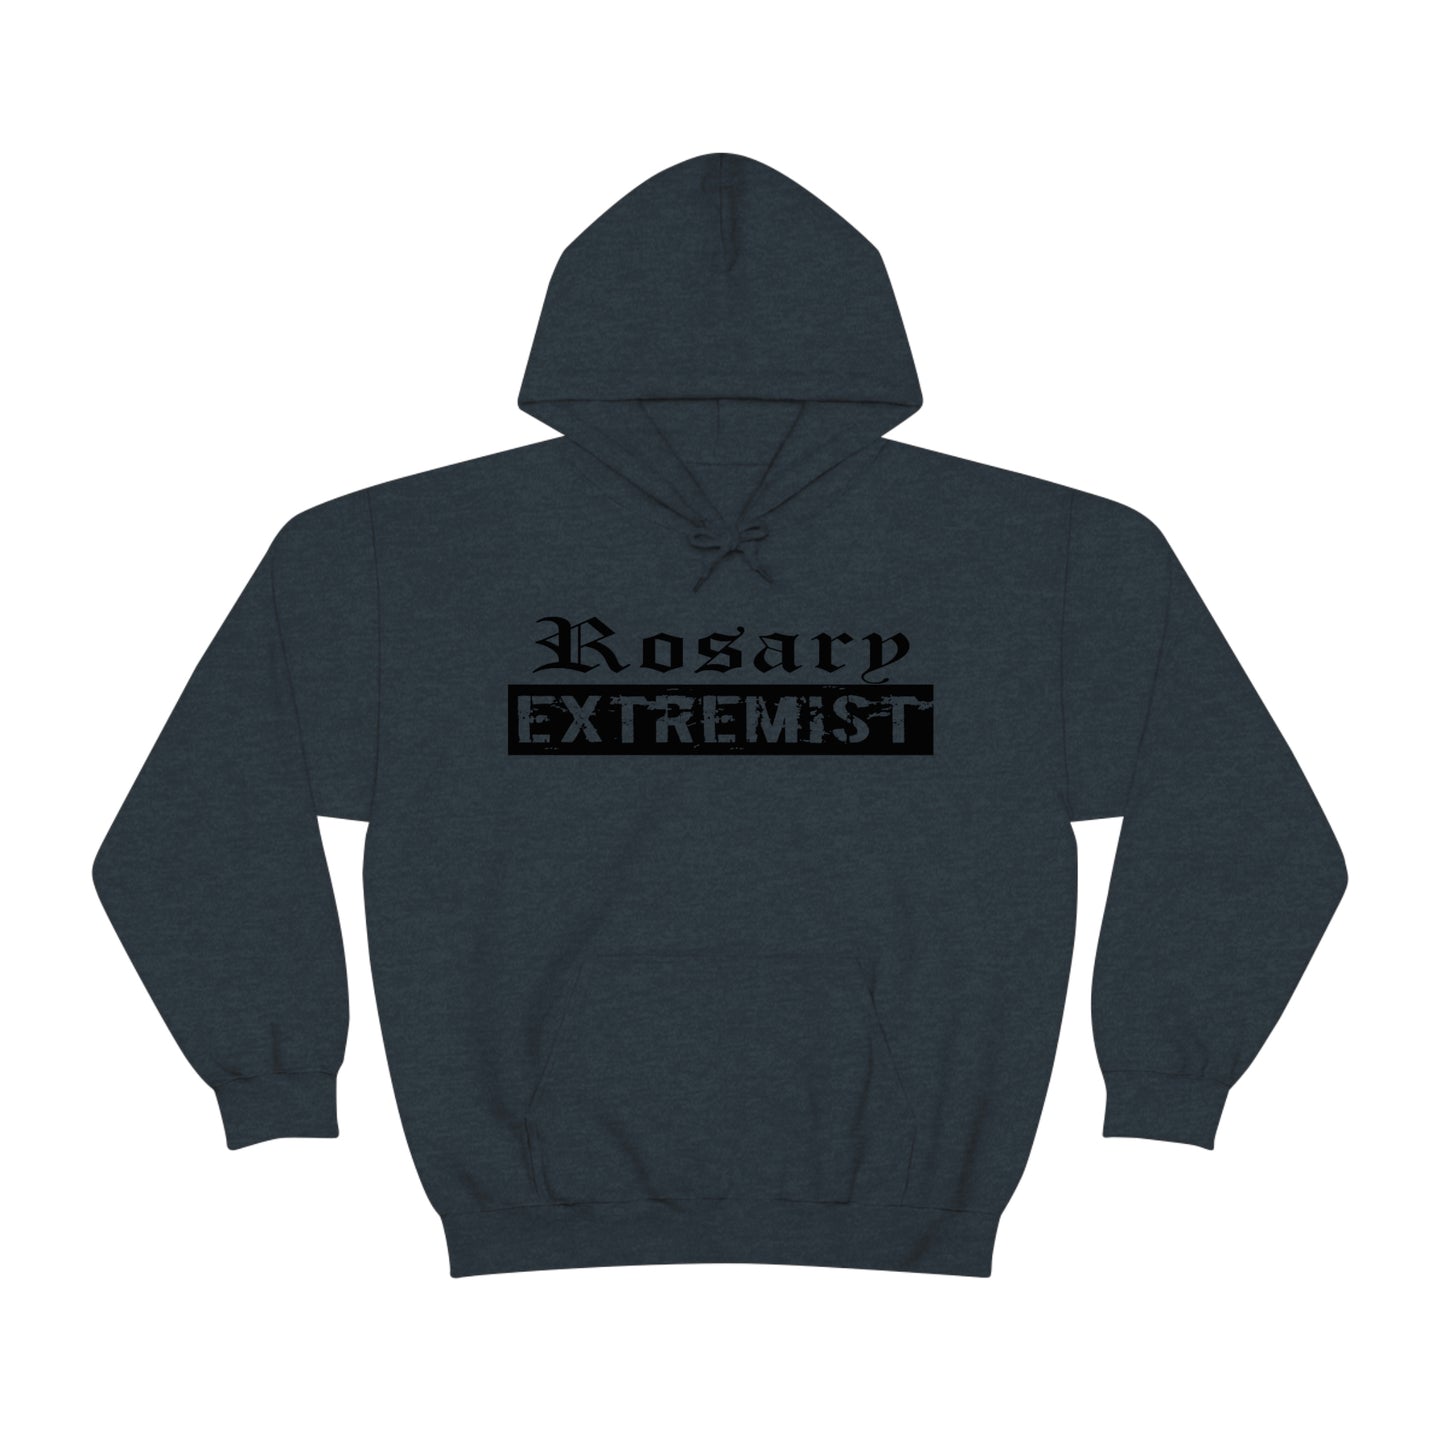 Heather Blue Hoodie with black "Rosary Extremist" text printed on it by Sanctus Servo.